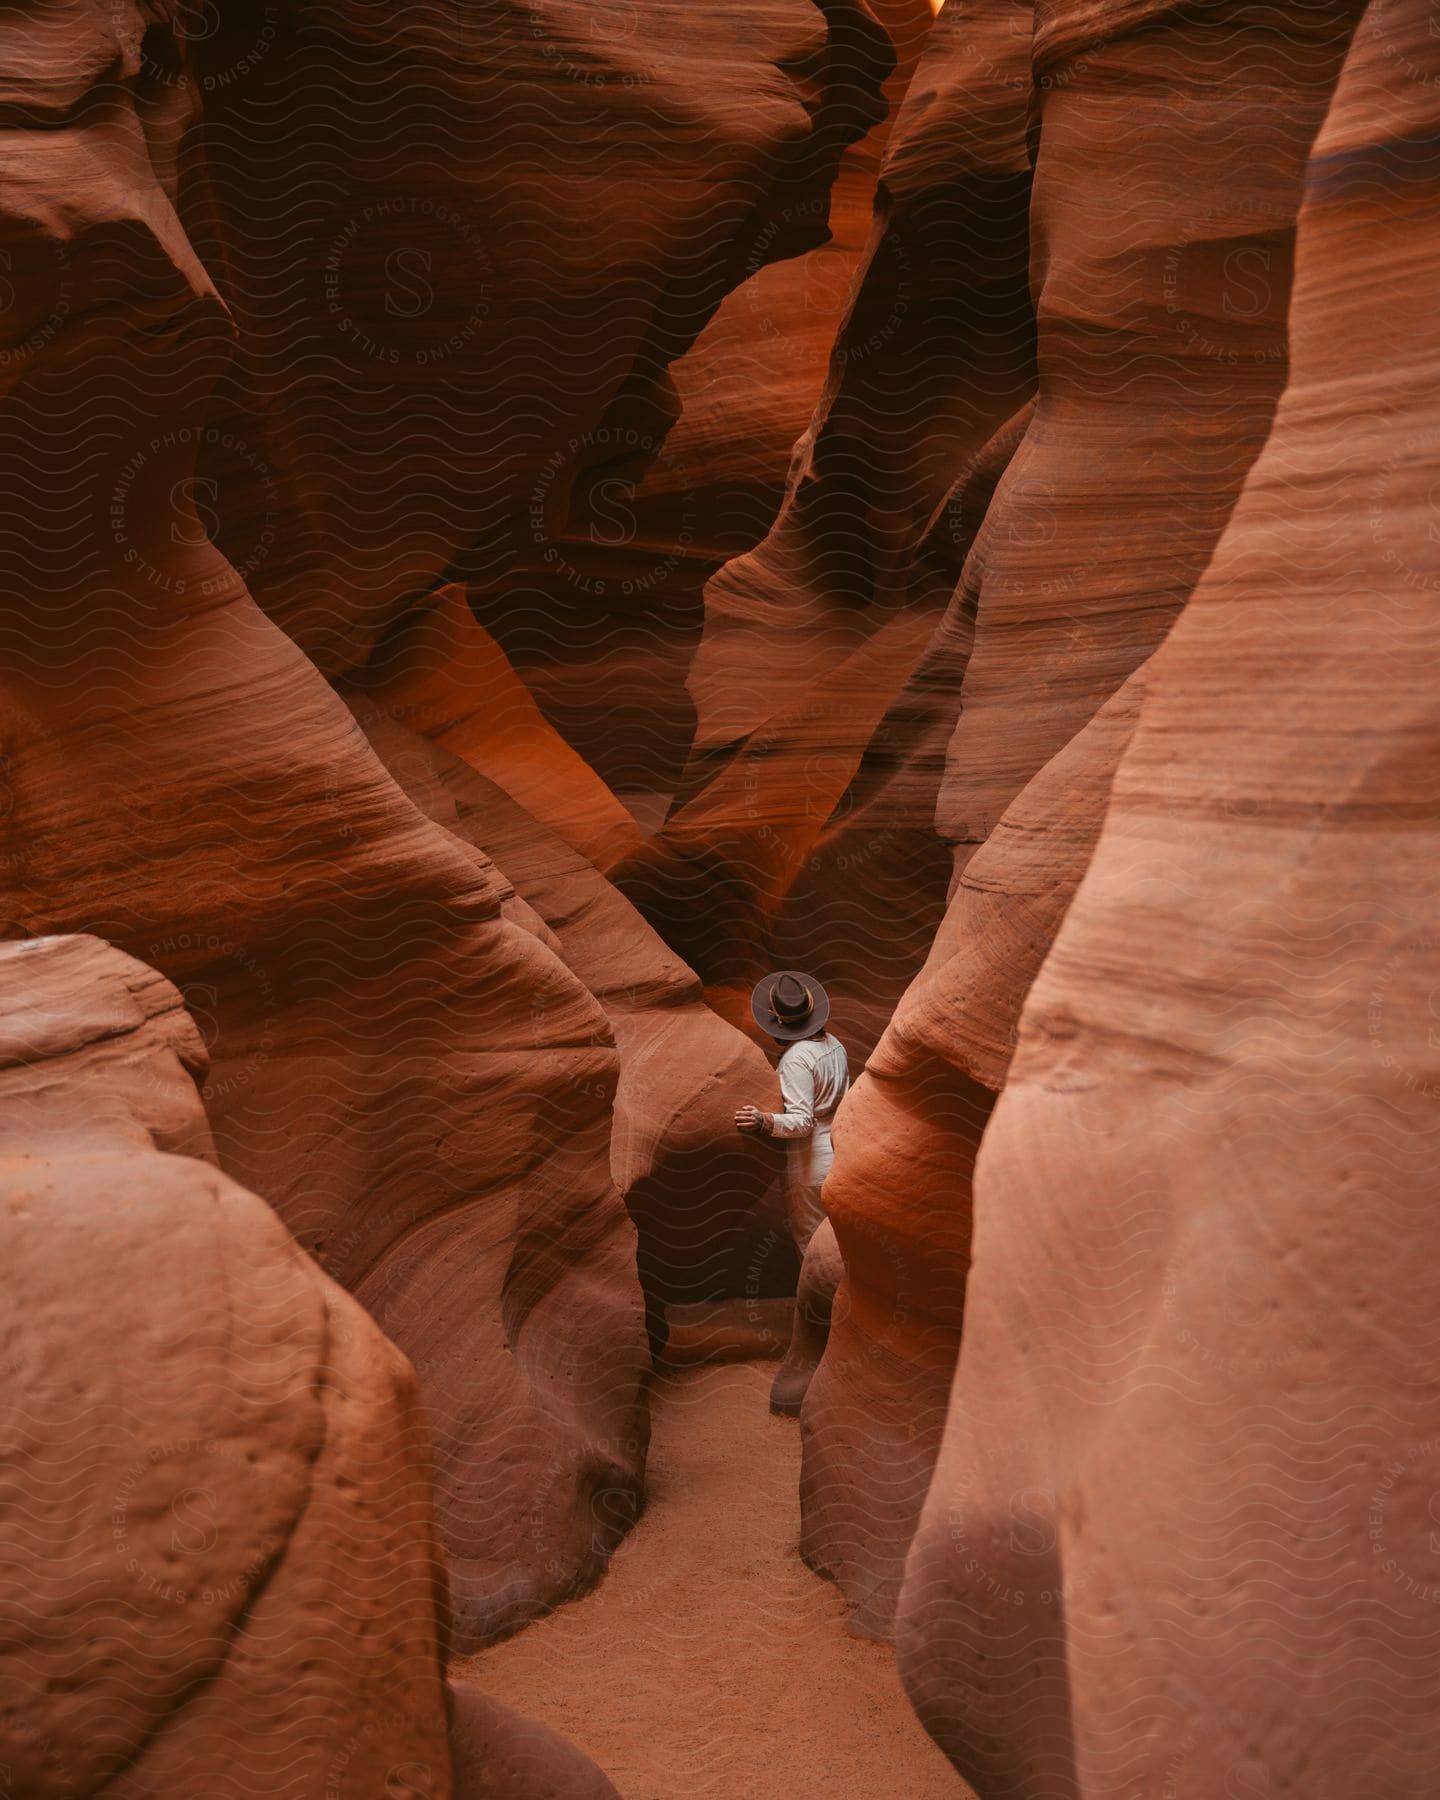 A tourist wearing a hat looks up while hiking in a narrow red rock canyon.